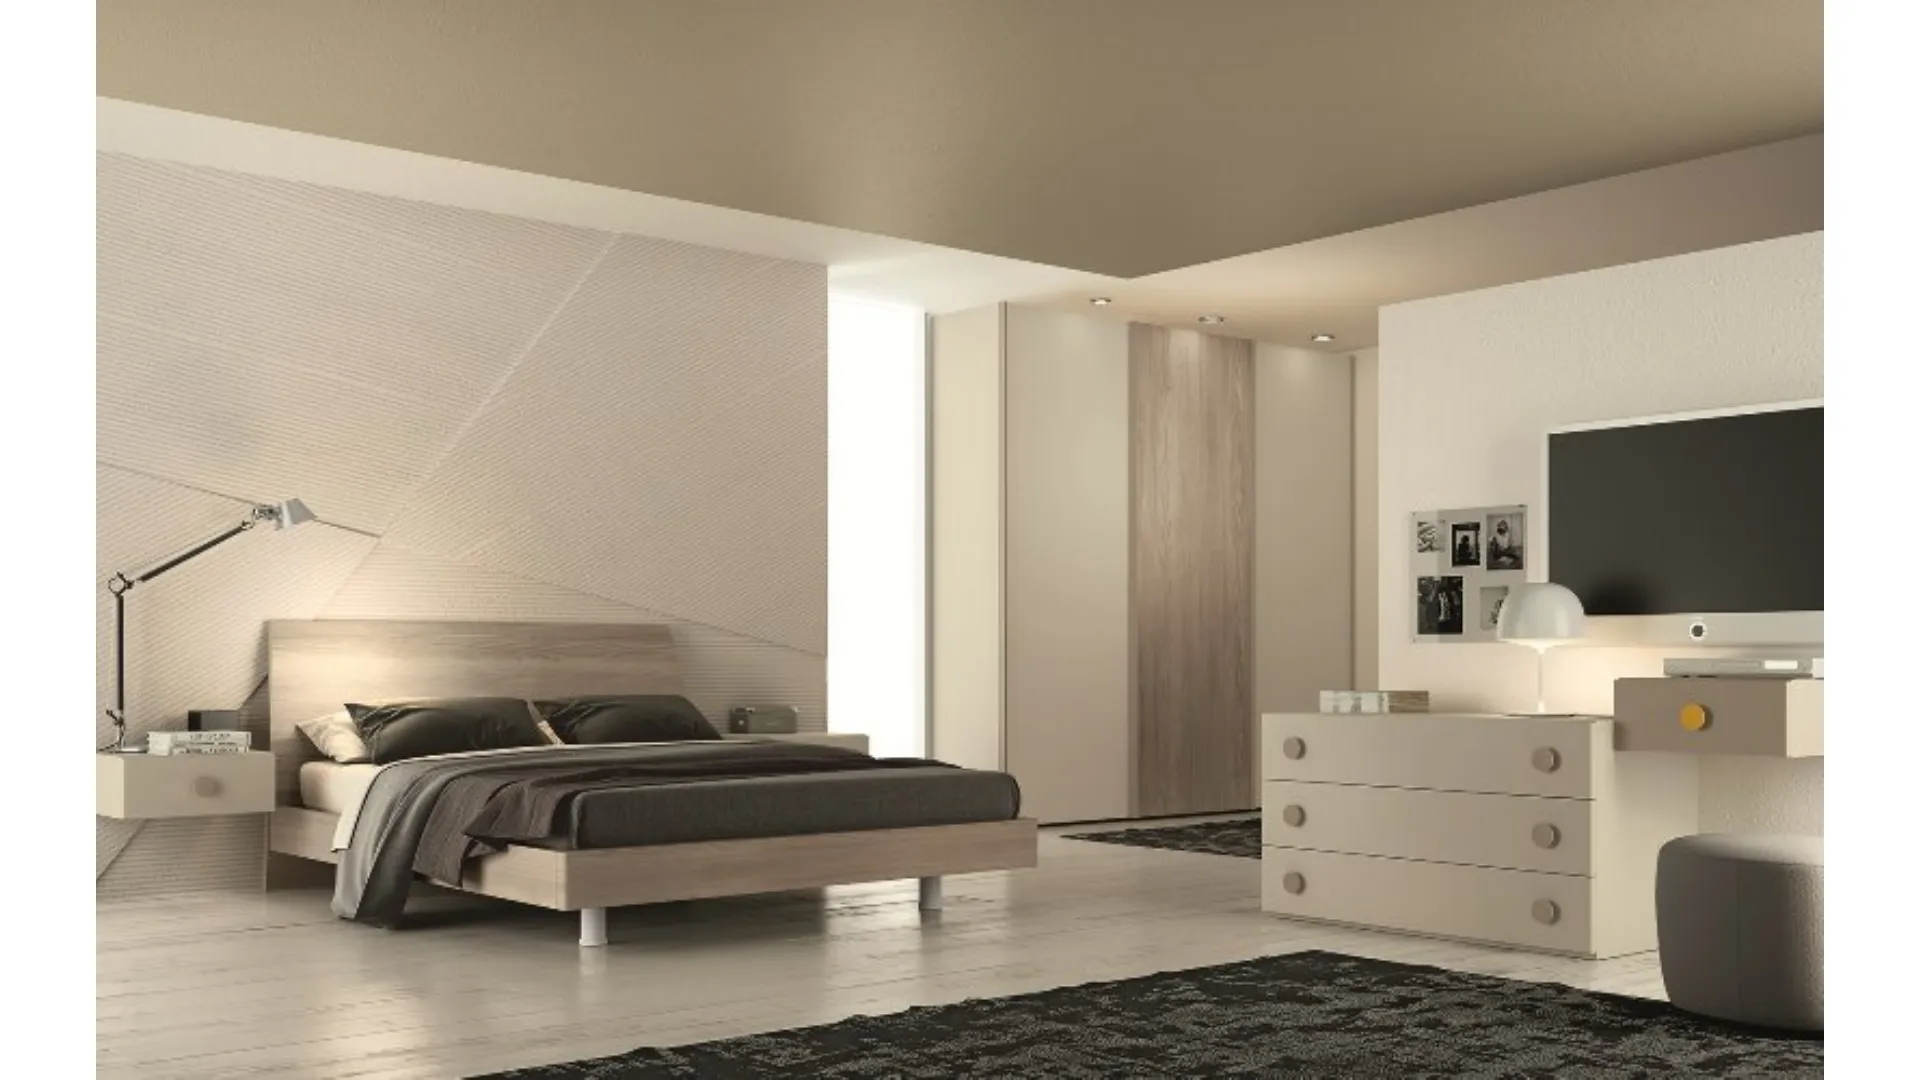 Bedroom with chest of drawers and sliding wardrobe